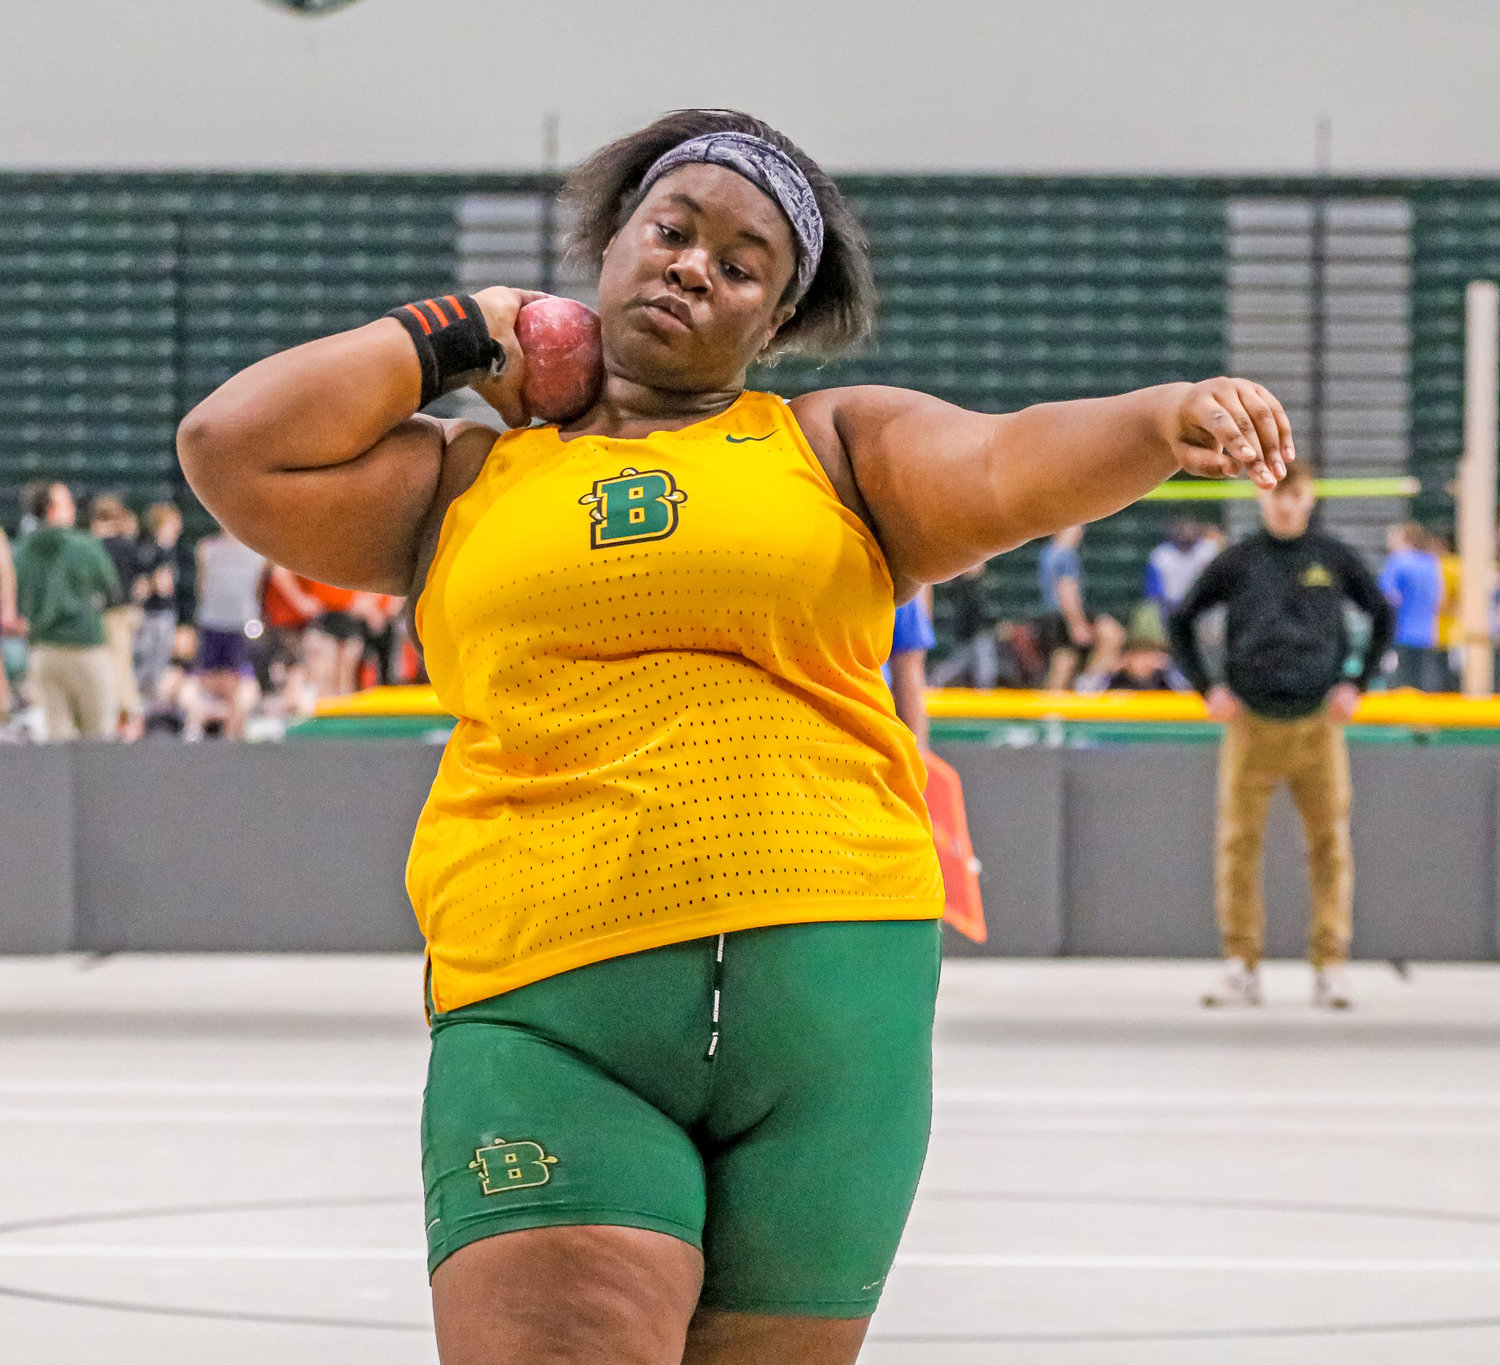 Sarah Crockett is among the top 20 NCAA Division III throwers in the country, ranking 11th in the weight throw and 17th in the shot put.